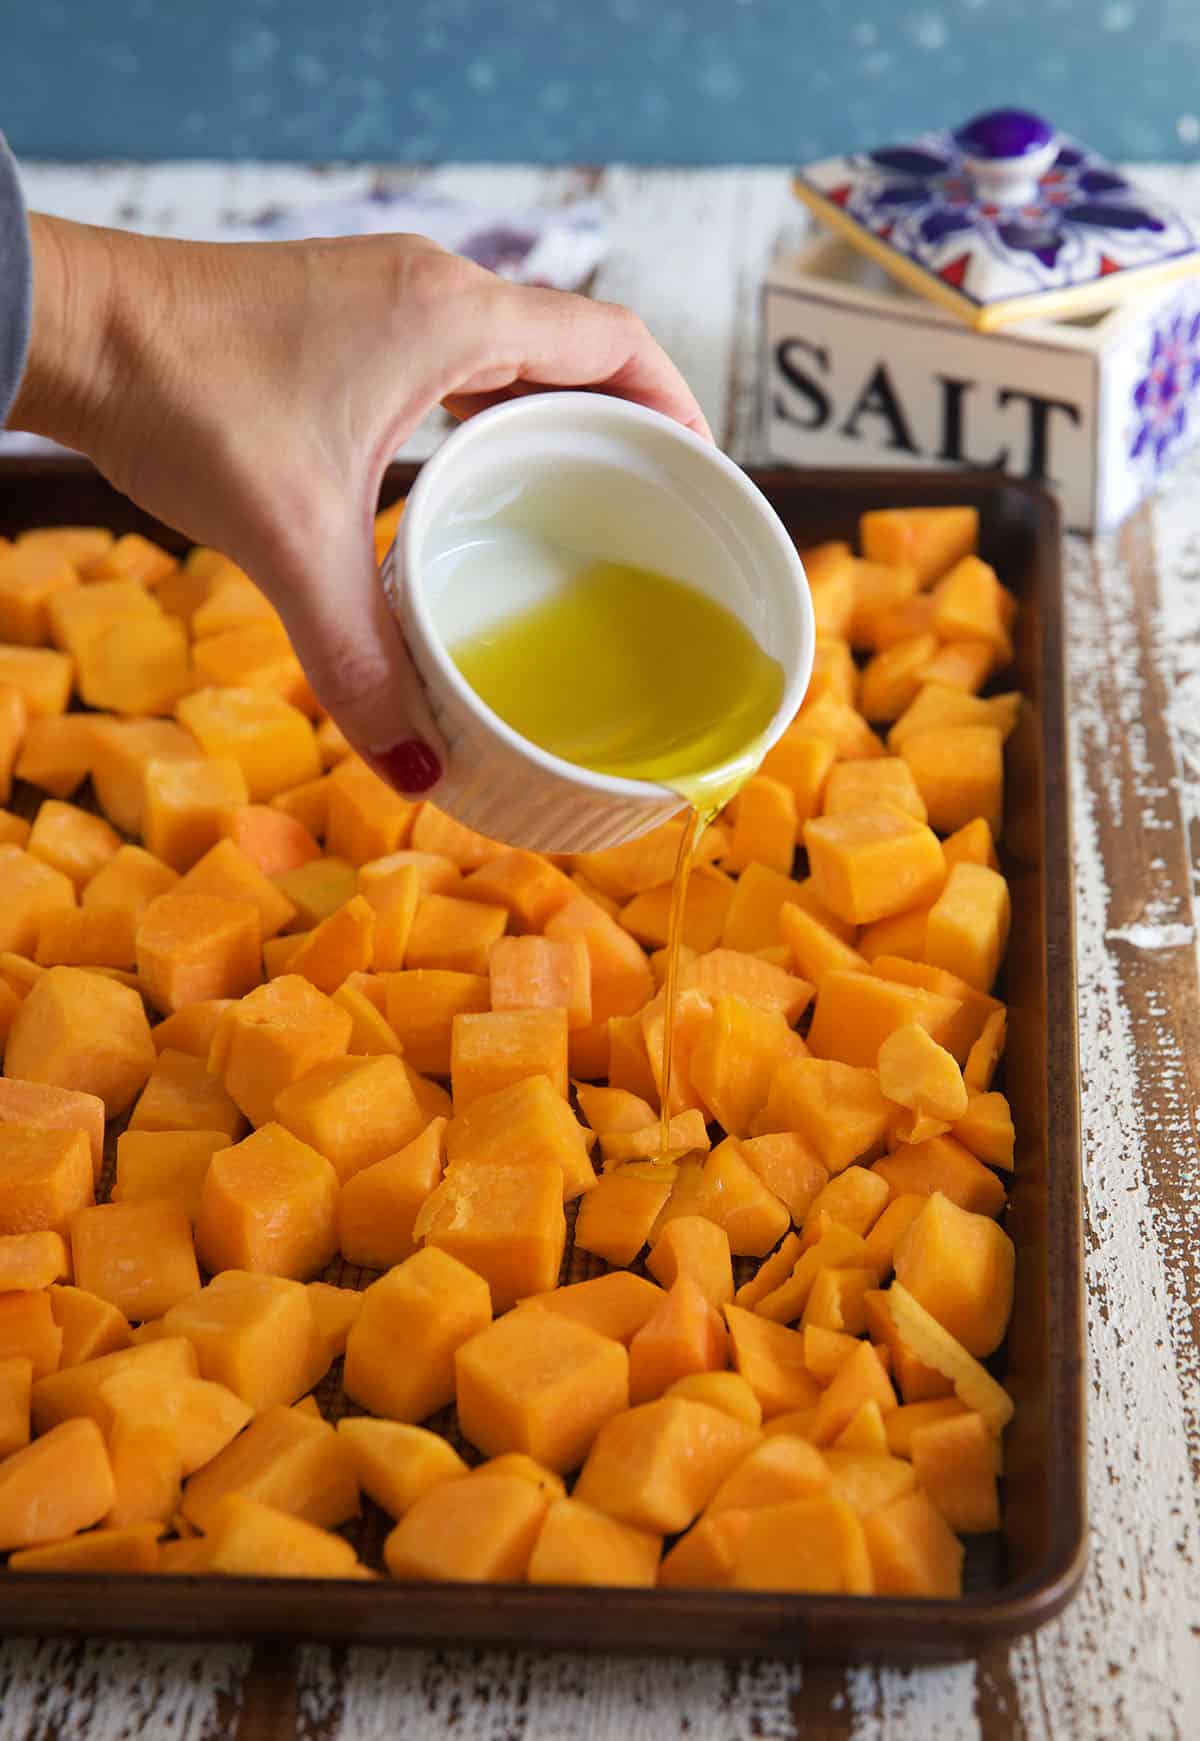 Olive oil is being drizzled over a baking sheet filled with butternut squash.